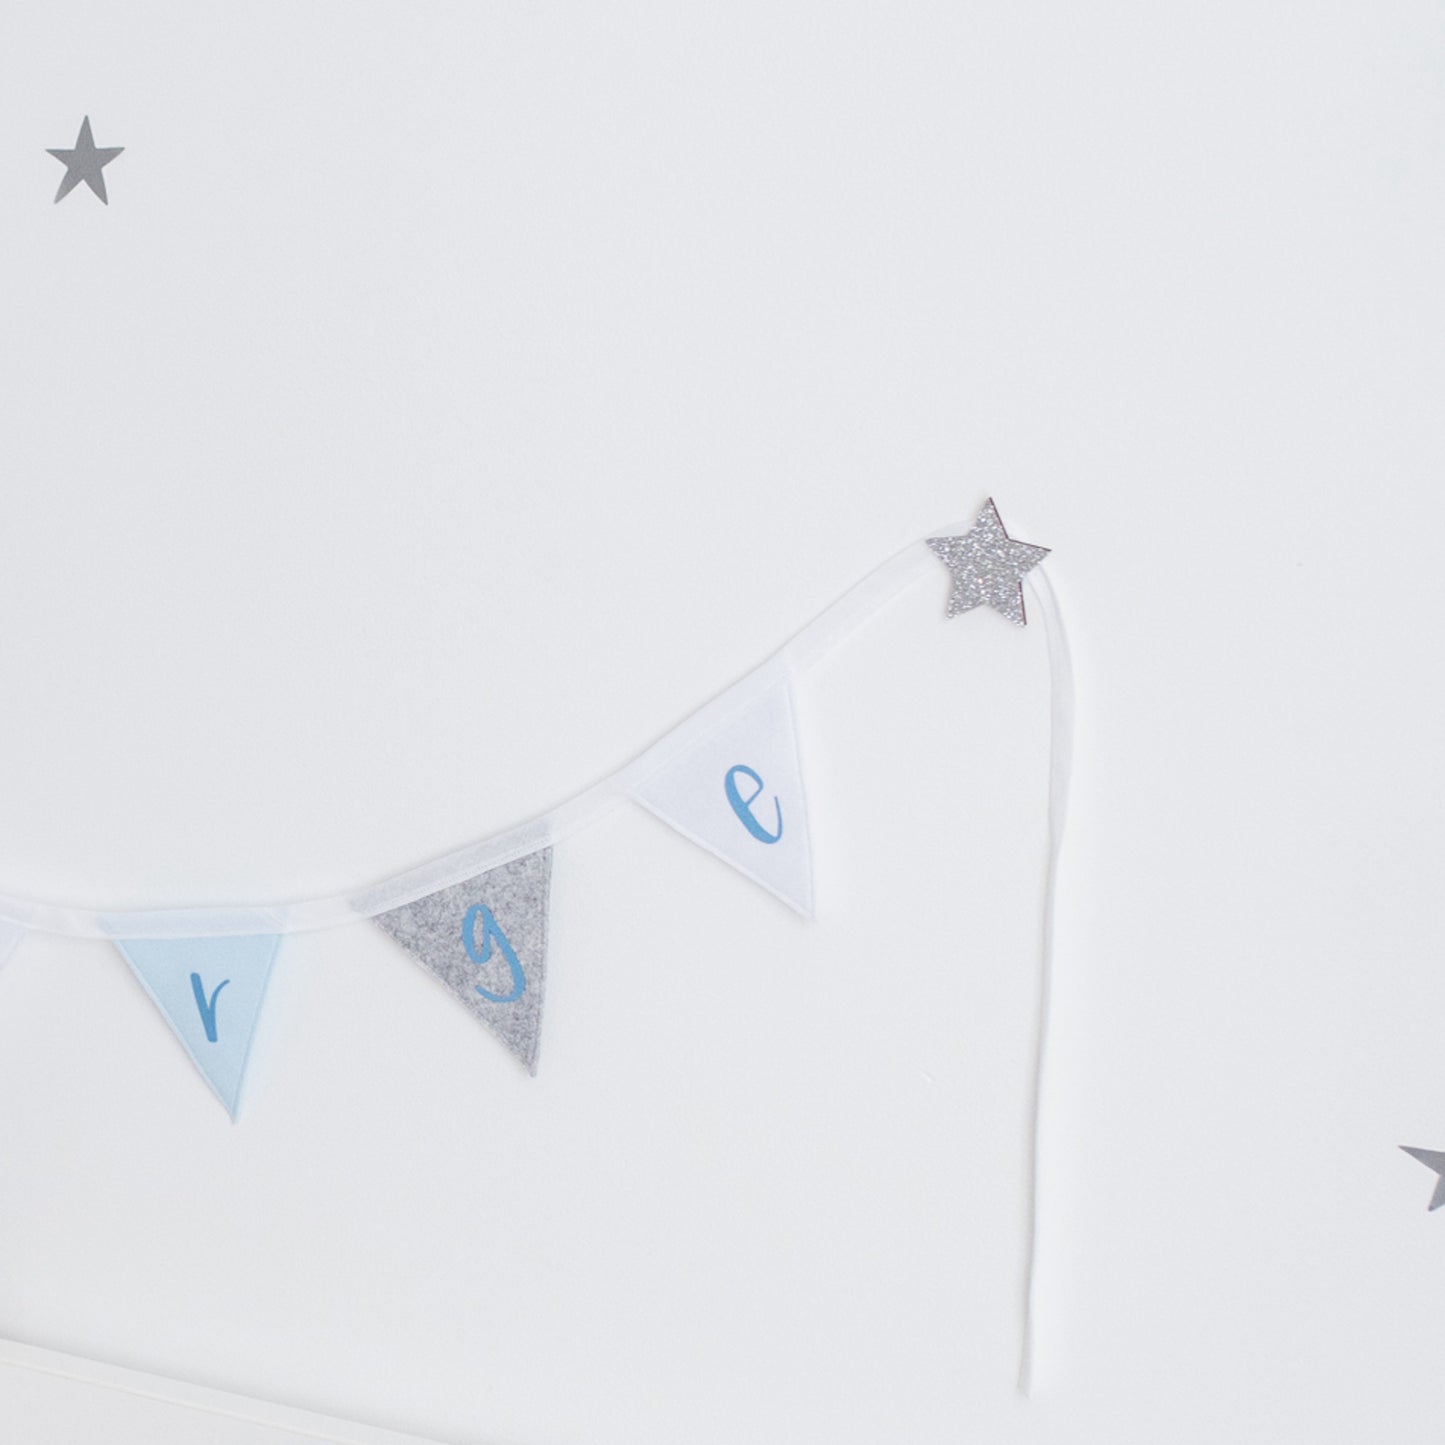 adhesive hooks to hang bunting in a child's room